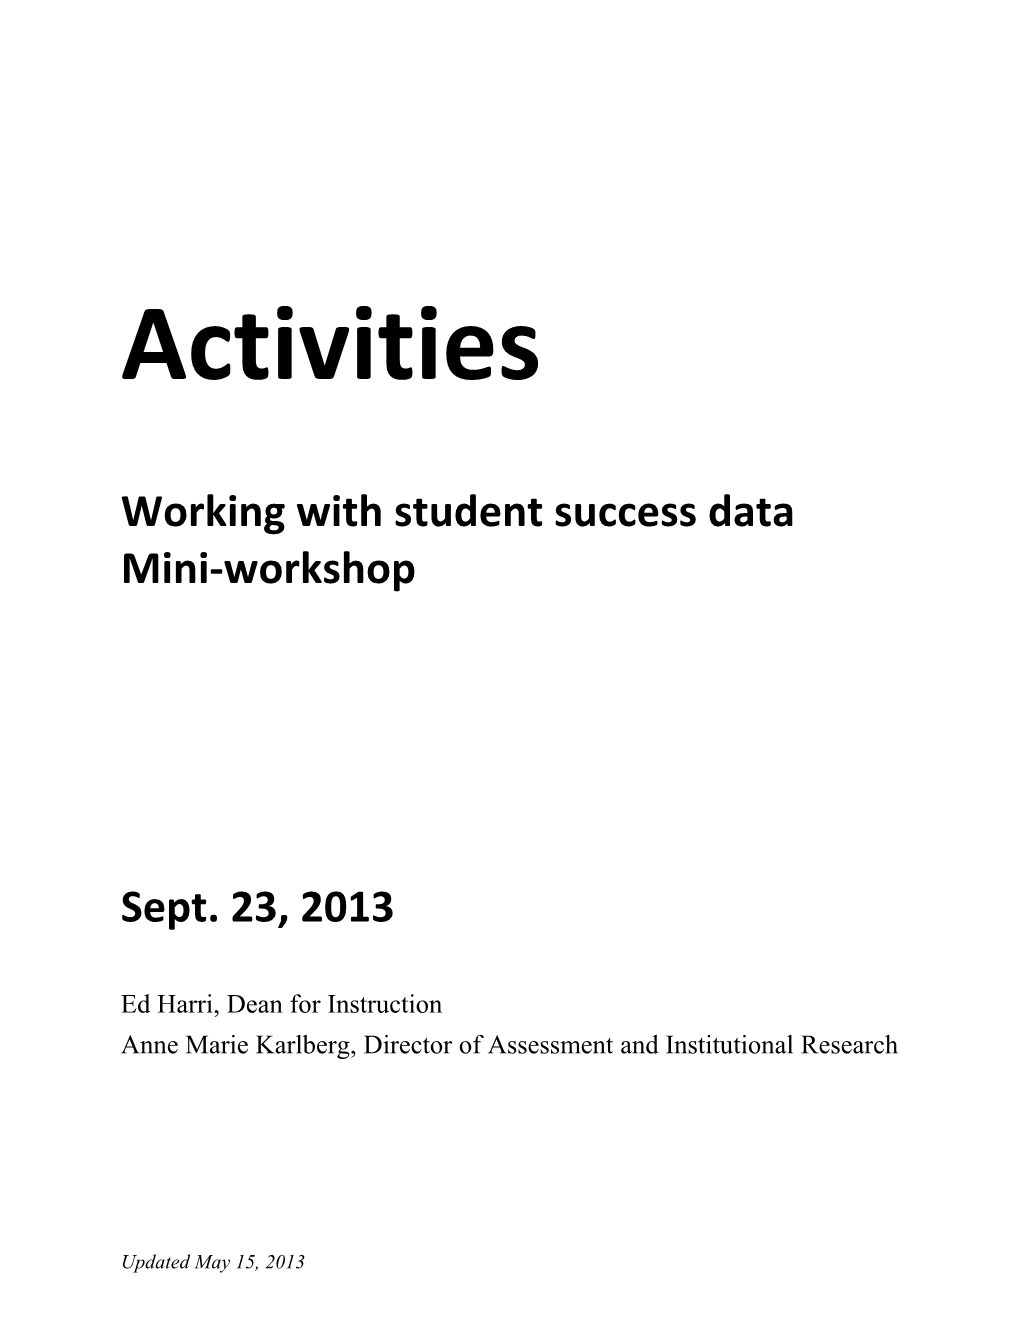 Working with Student Success Data